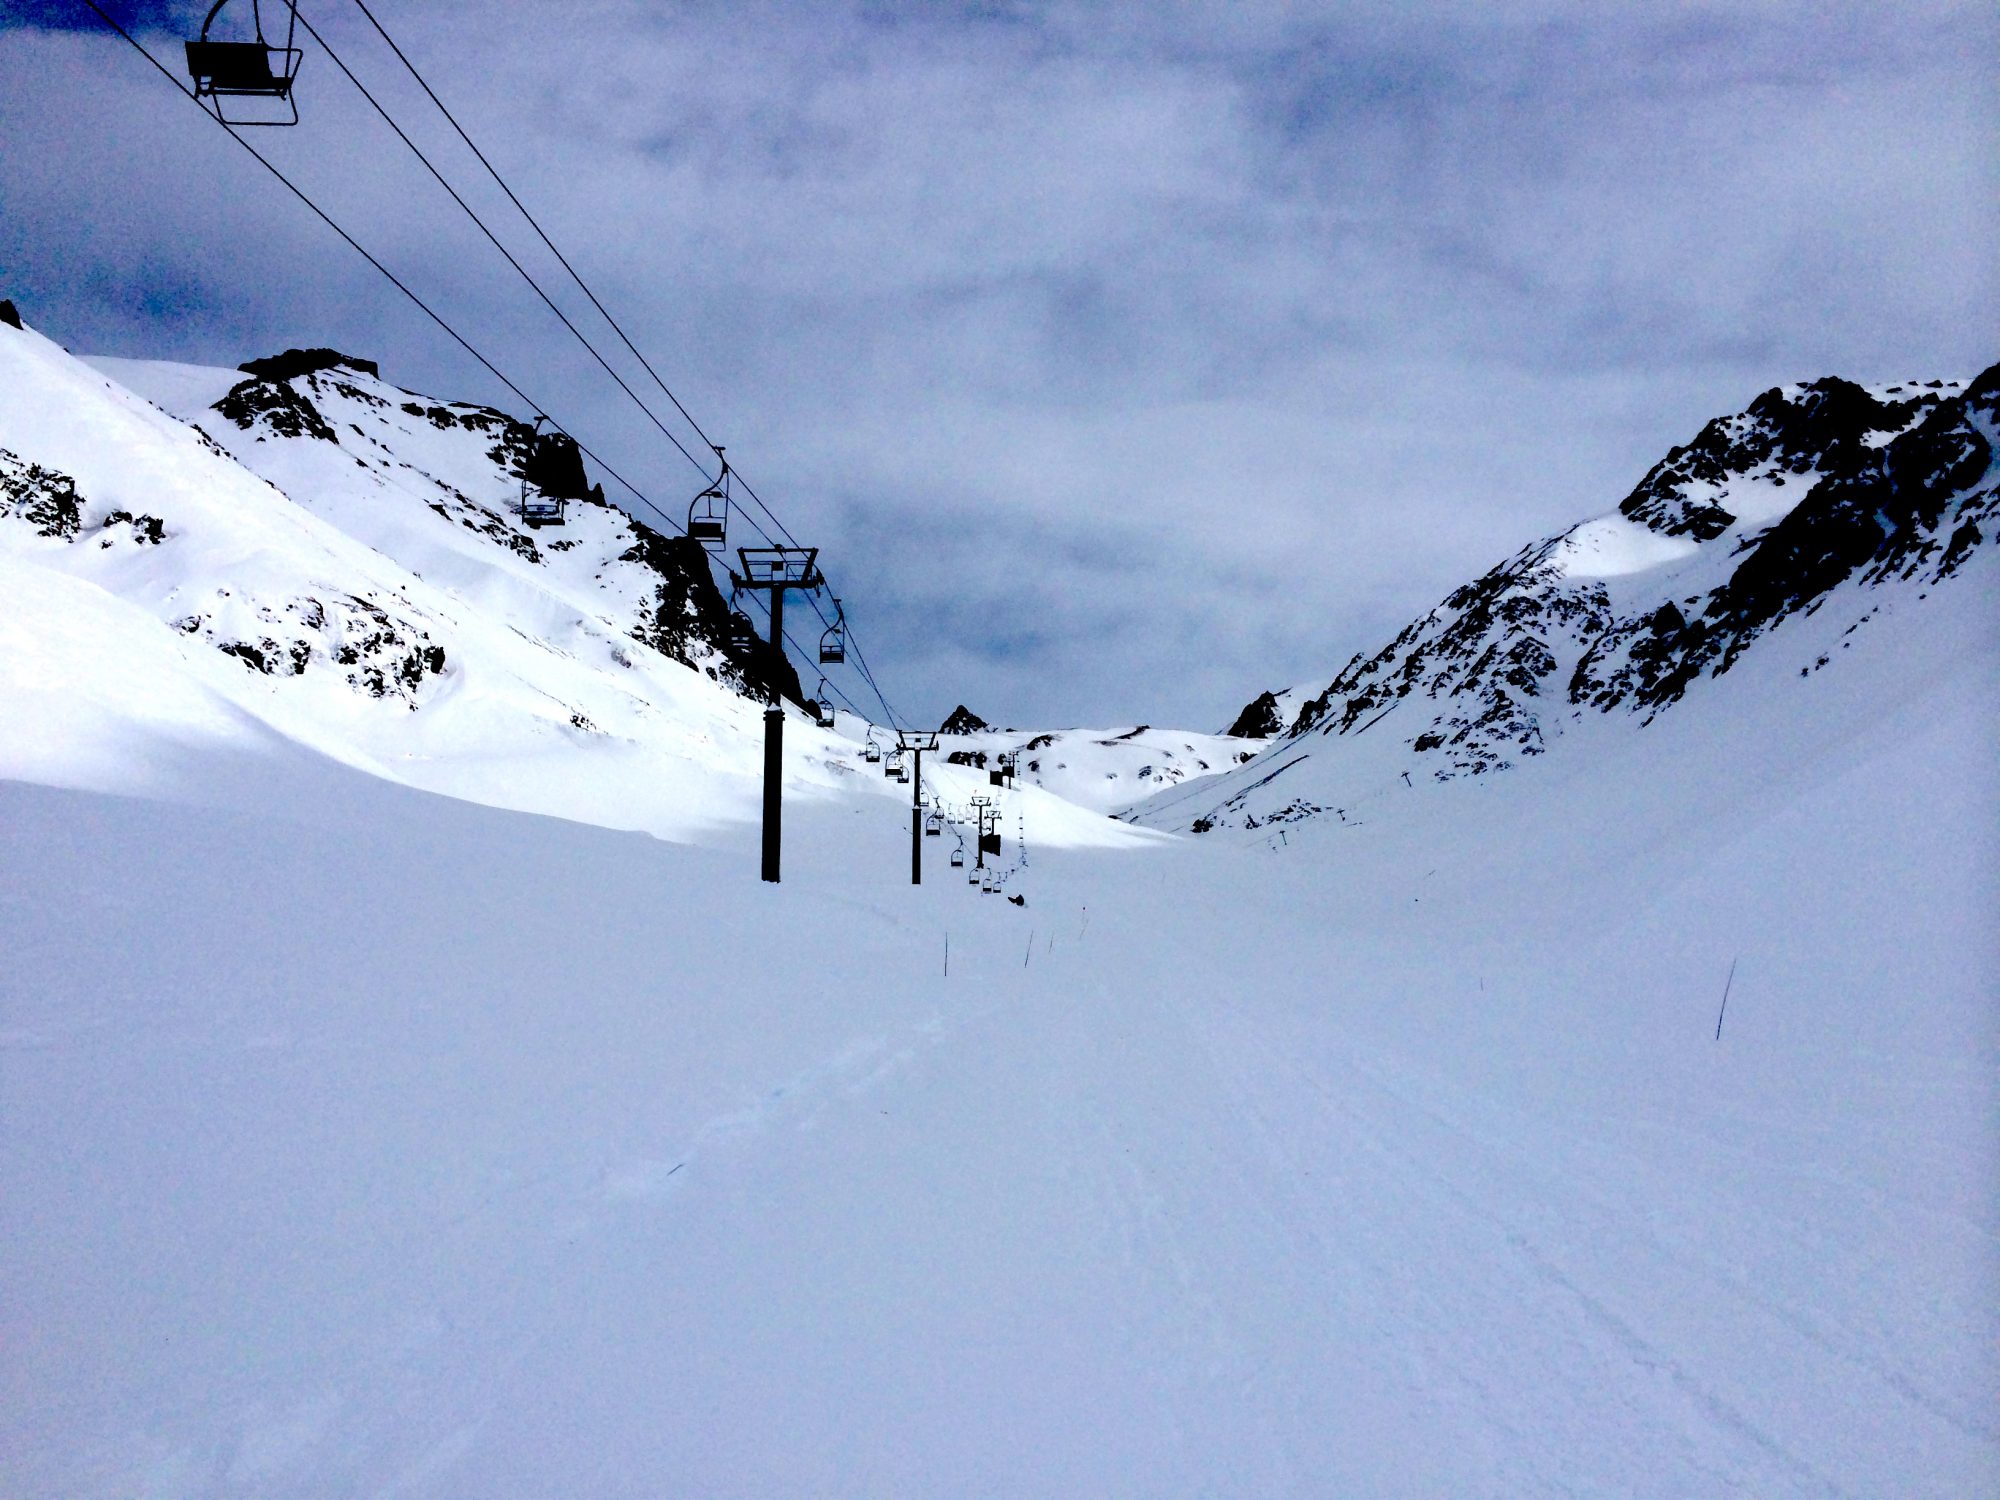 Photo of Neptuno chairlift in Las Leñas on the ground after being affected by an avalanche -Photo credit: Snowbrains. Las Leñas has high prone avalanche terrain